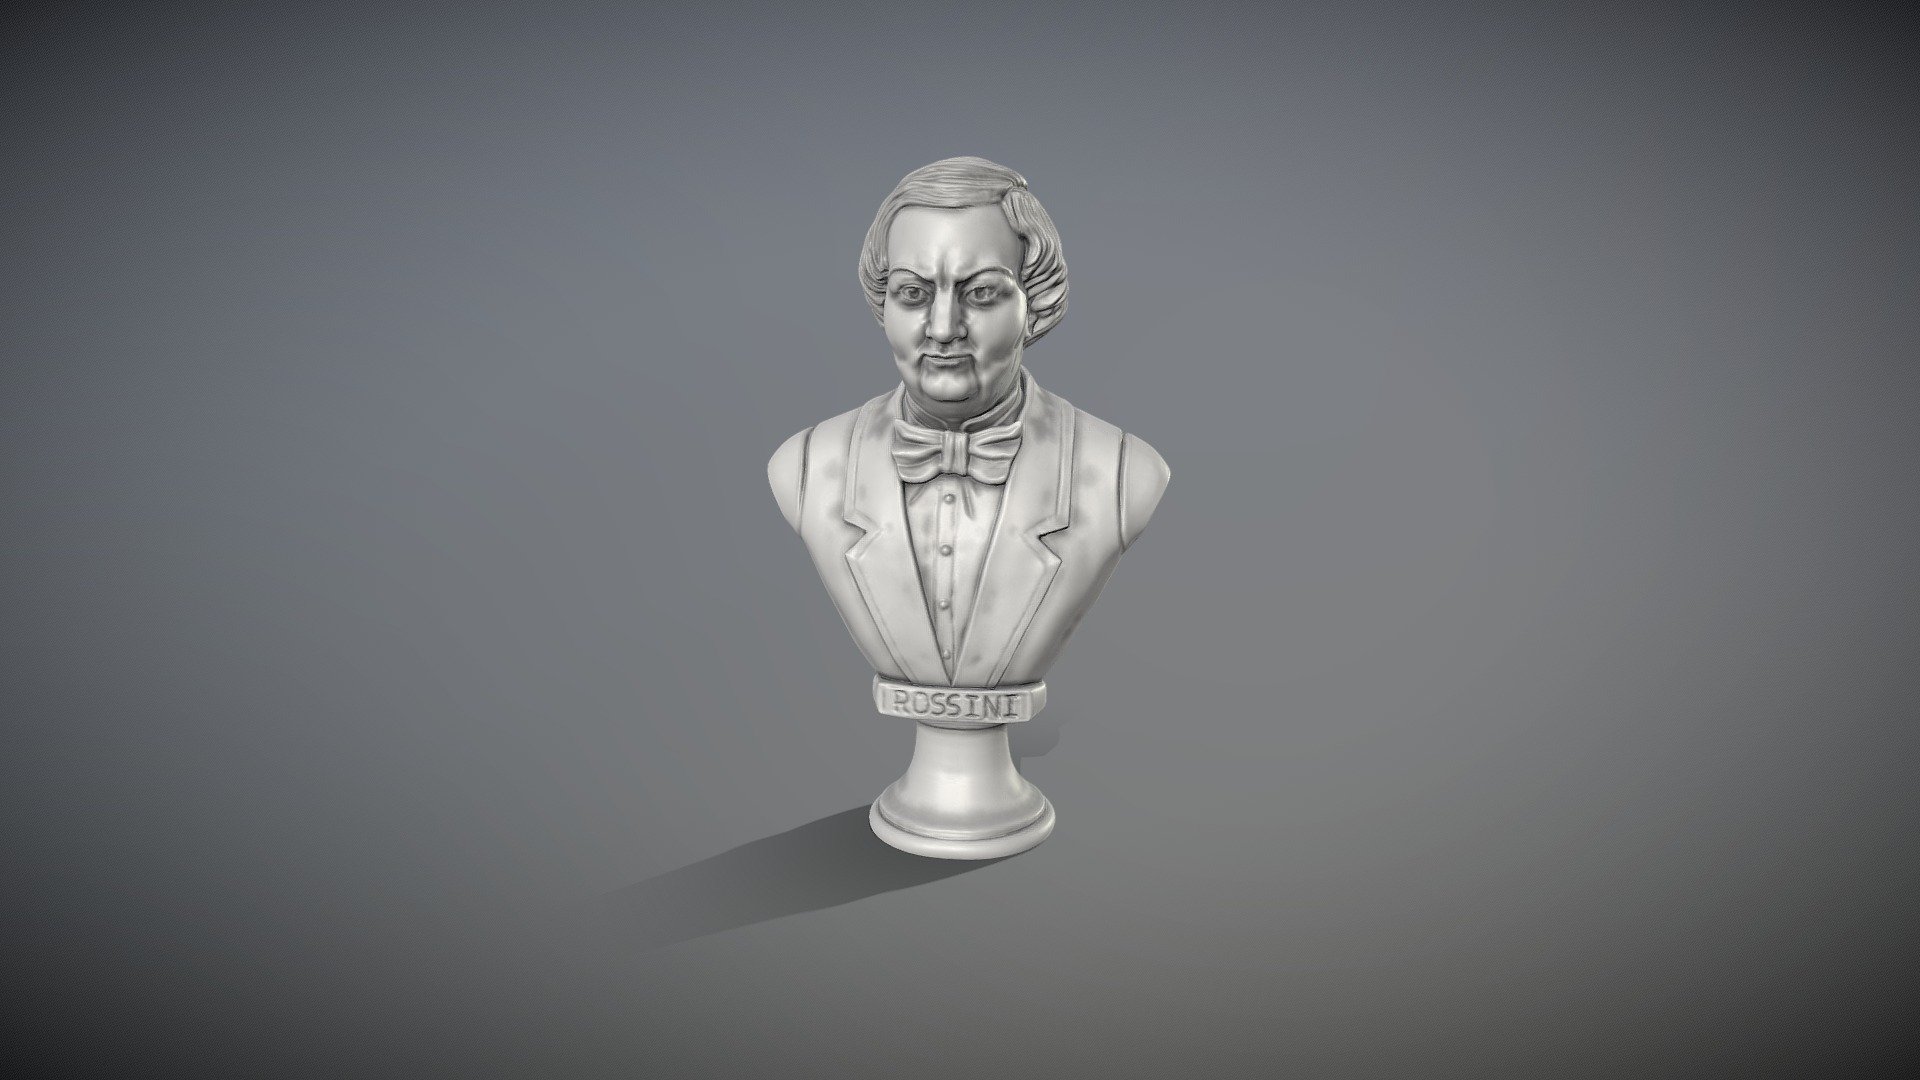 Rossini Gioacchino Composer Bust for 3d print

Modeled in zbrush for 3D printing, a solid model is provided in stl format, also in OBJ and FBX formats with textures and UV maps to enable its use in applications other than 3D printing.

Gioachino Rossini was an Italian composer who gained fame for his 39 operas, although he also wrote many songs, some chamber and piano music pieces and some sacred music 3d model